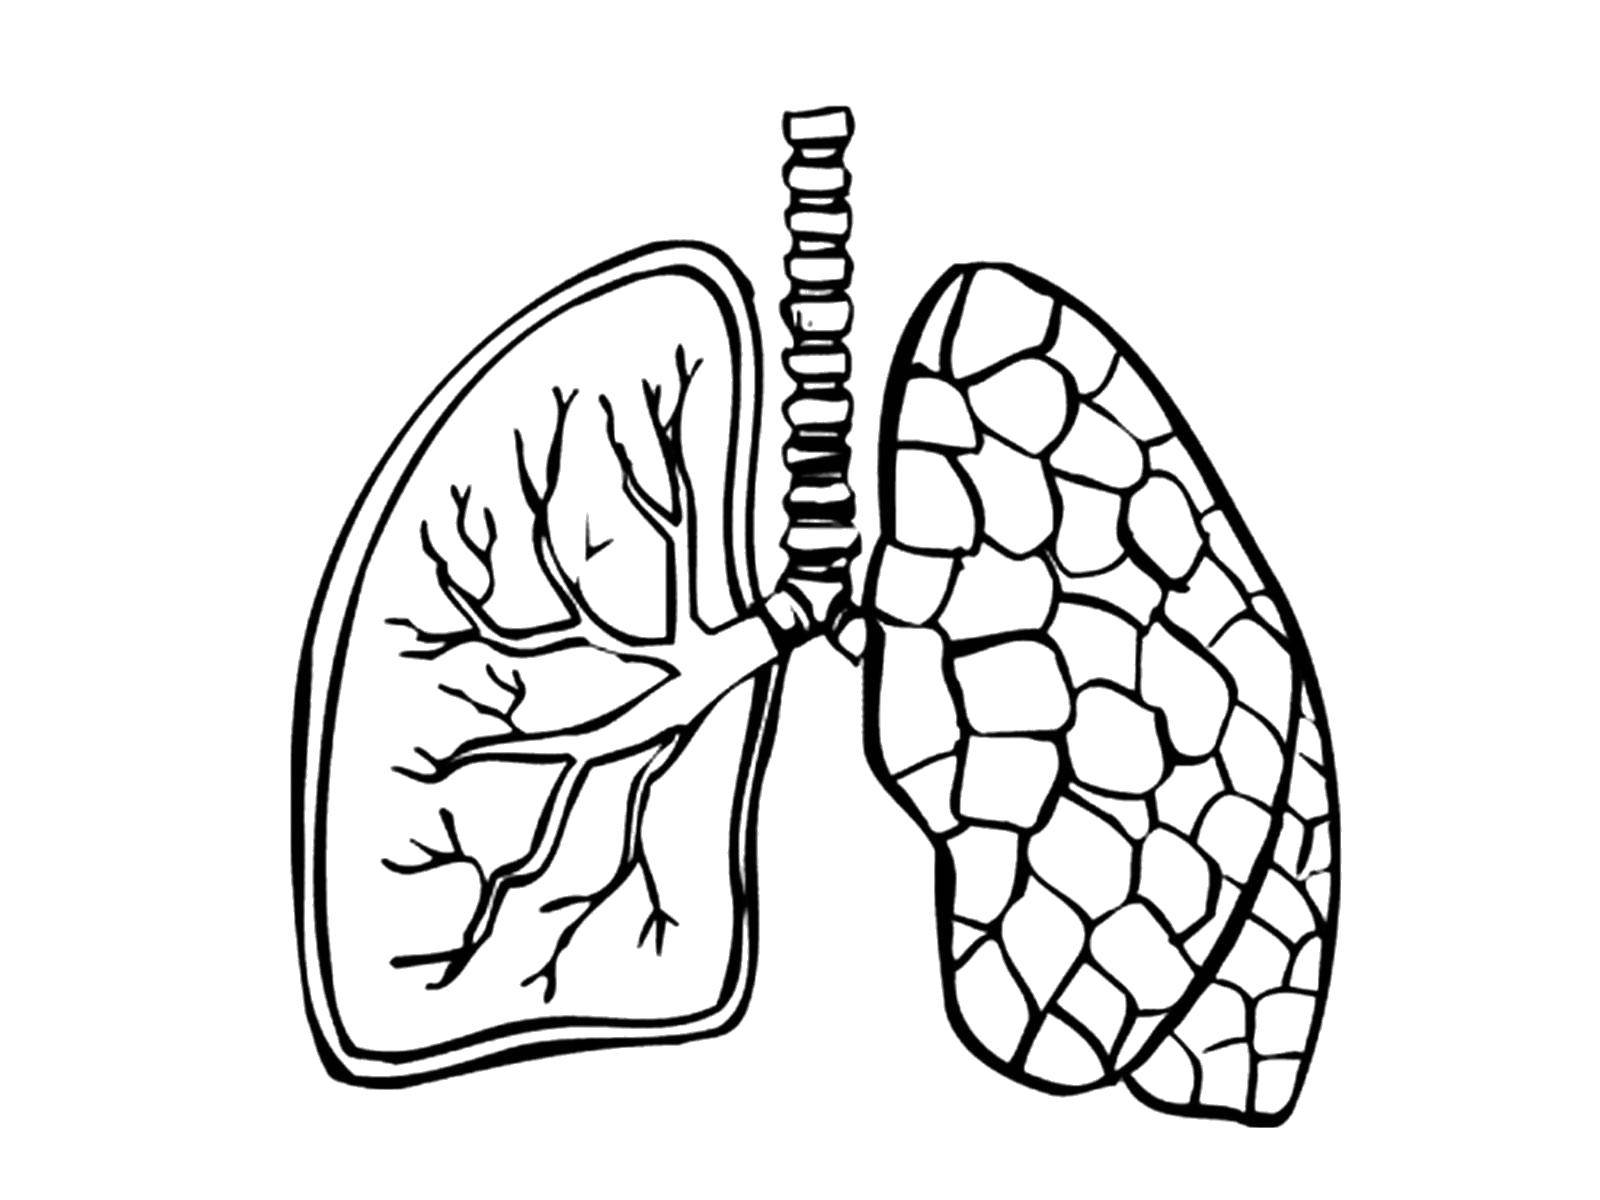 Coloring Light. Category The structure of the body. Tags:  Lungs.